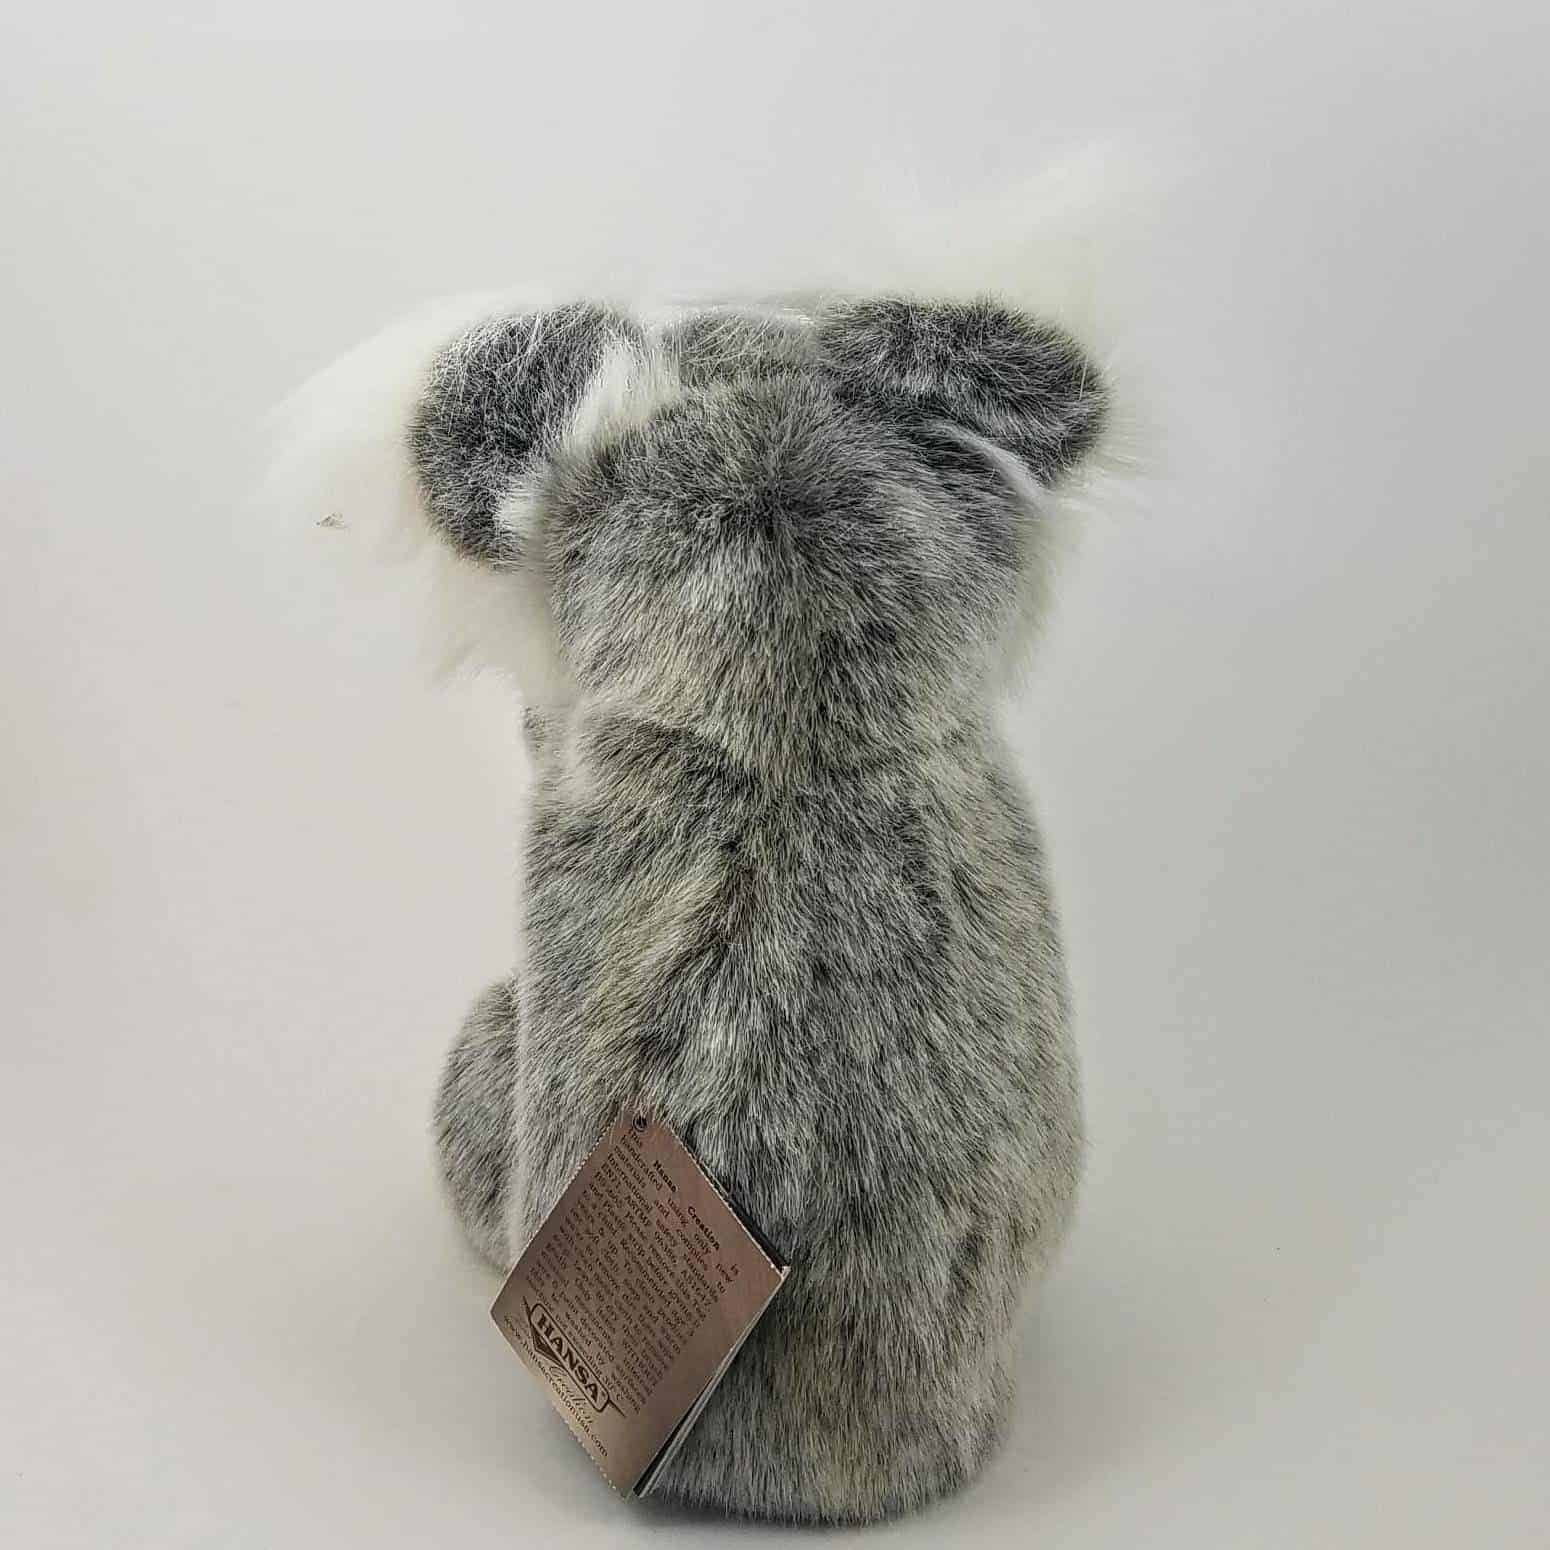 This Koala Hand Puppet by Hansa True to Life Looking Soft Plush Animal Learning Toy is made with love by Premier Homegoods! Shop more unique gift ideas today with Spots Initiatives, the best way to support creators.